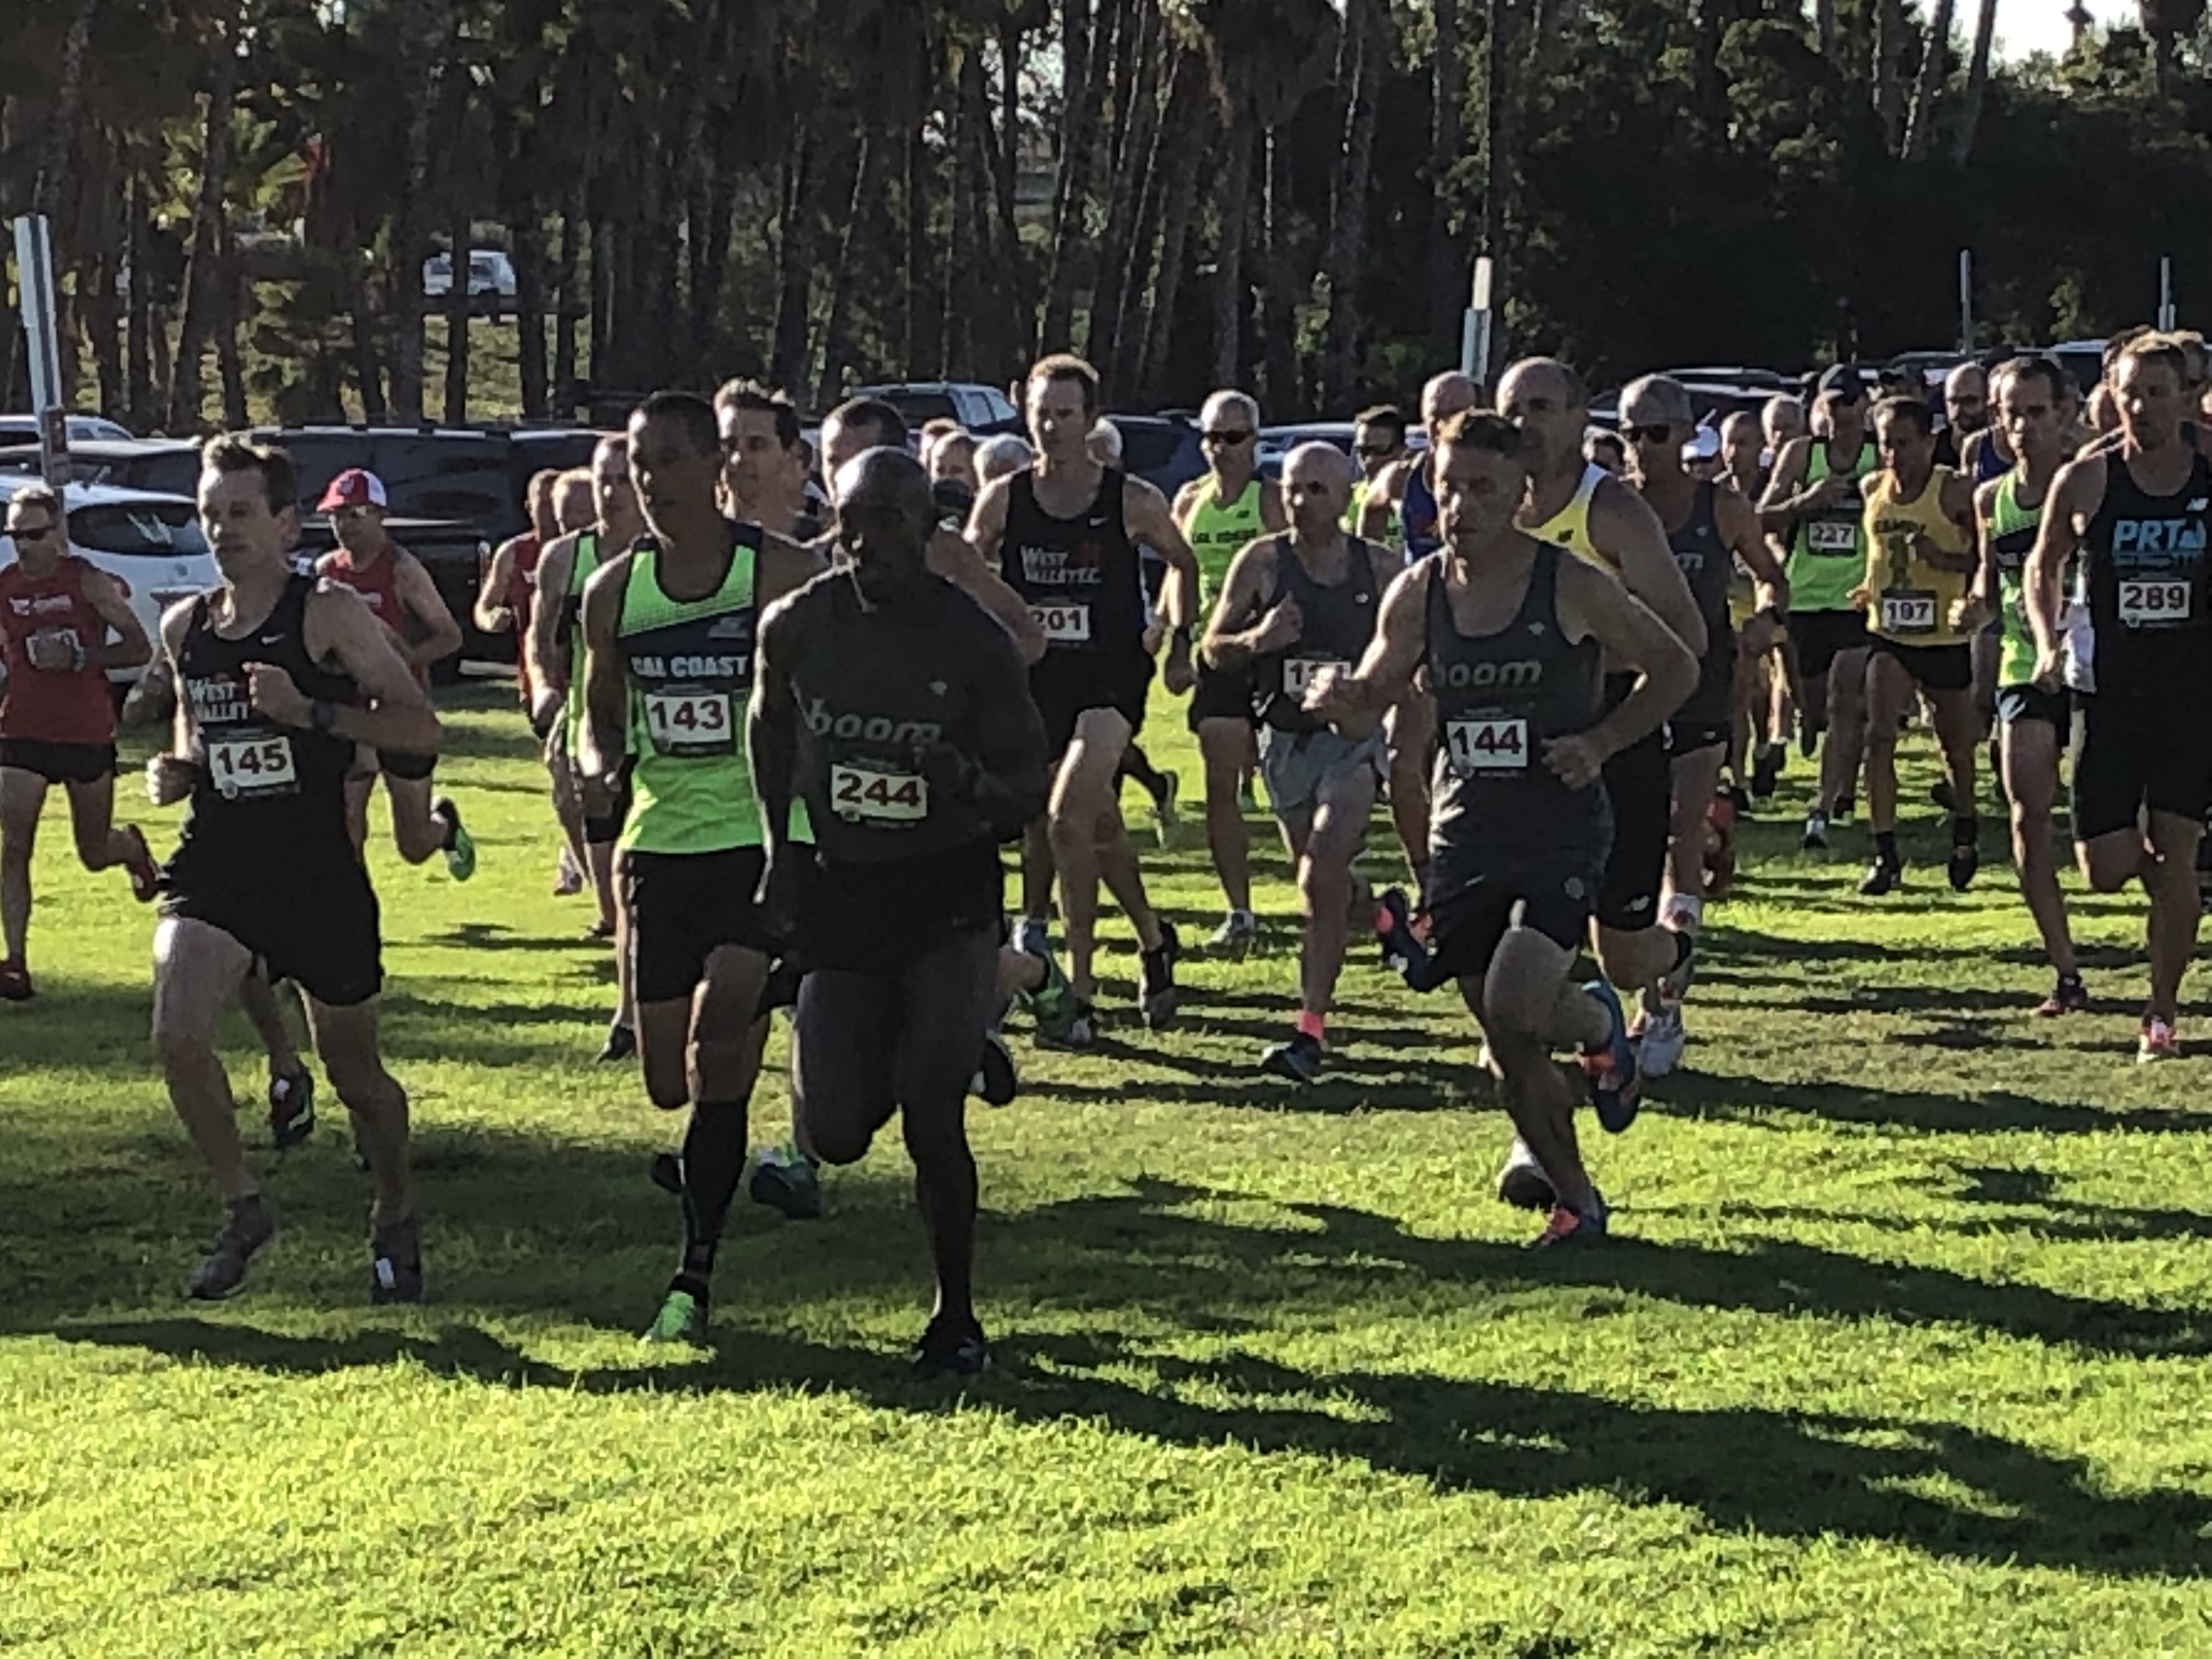 Masters Cross Country